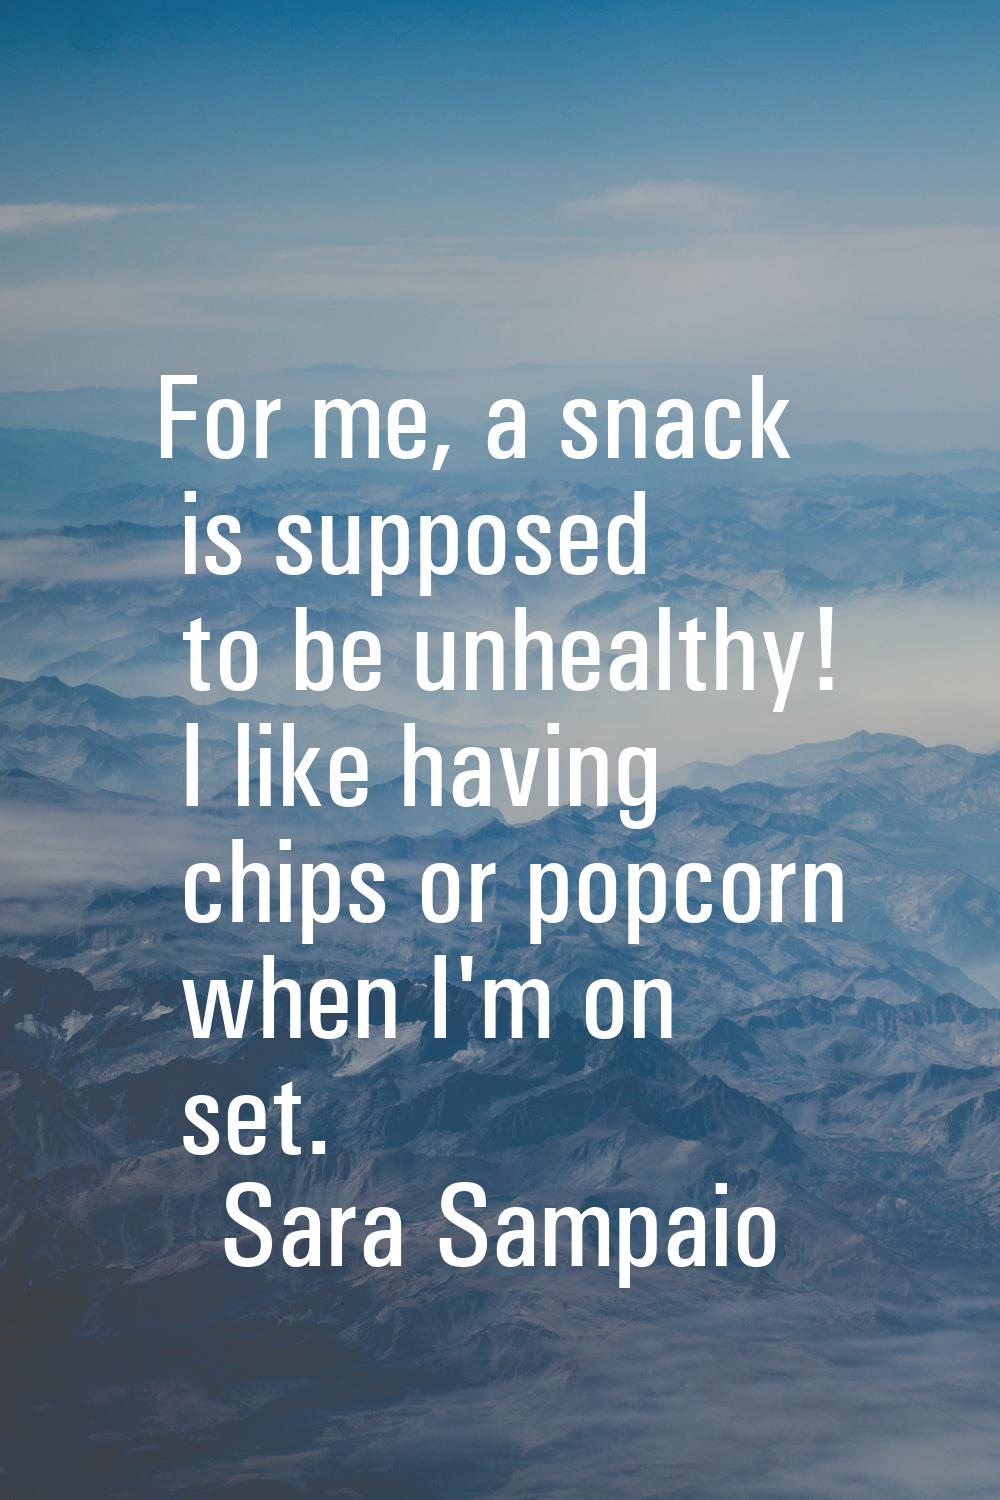 For me, a snack is supposed to be unhealthy! I like having chips or popcorn when I'm on set.